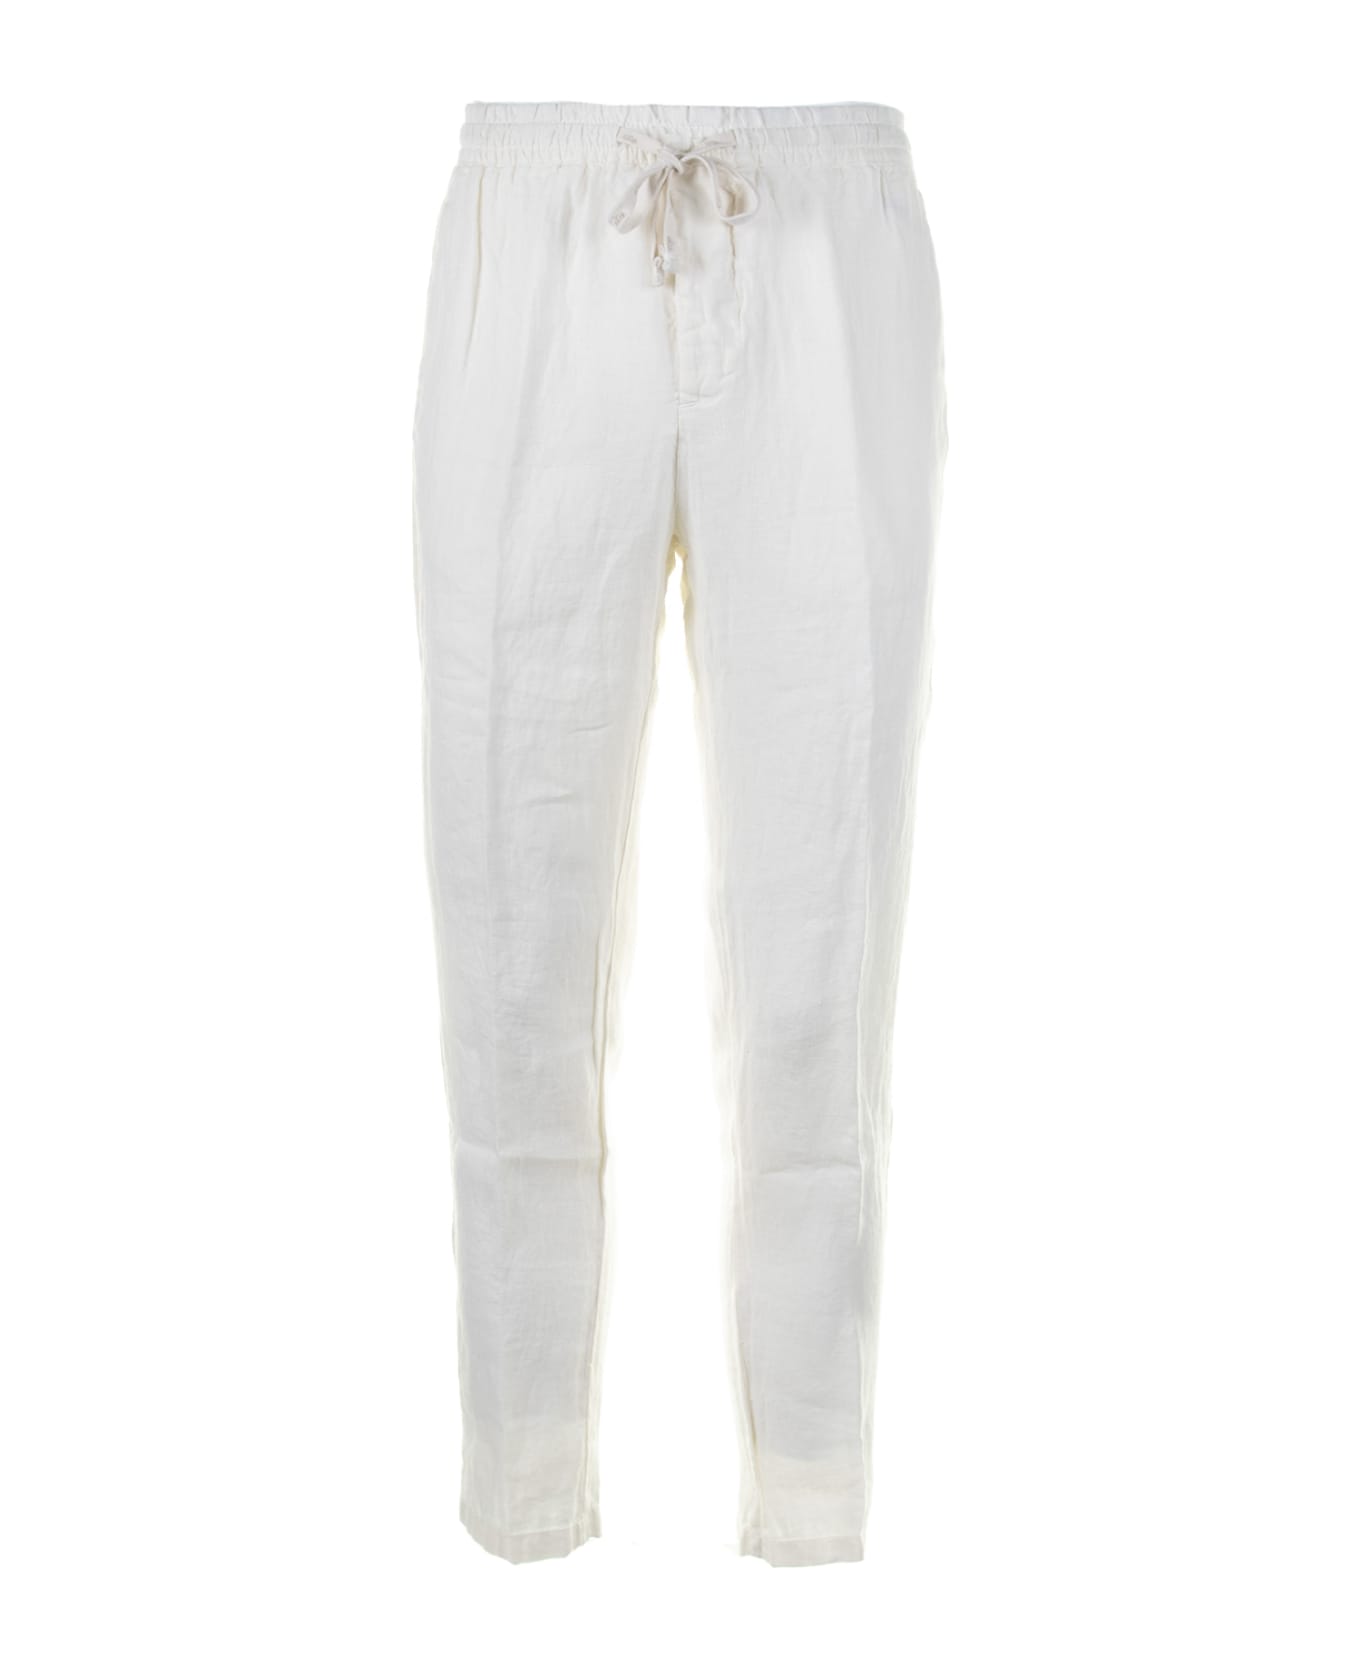 Altea White Linen Trousers With Drawstring - BIANCO ボトムス